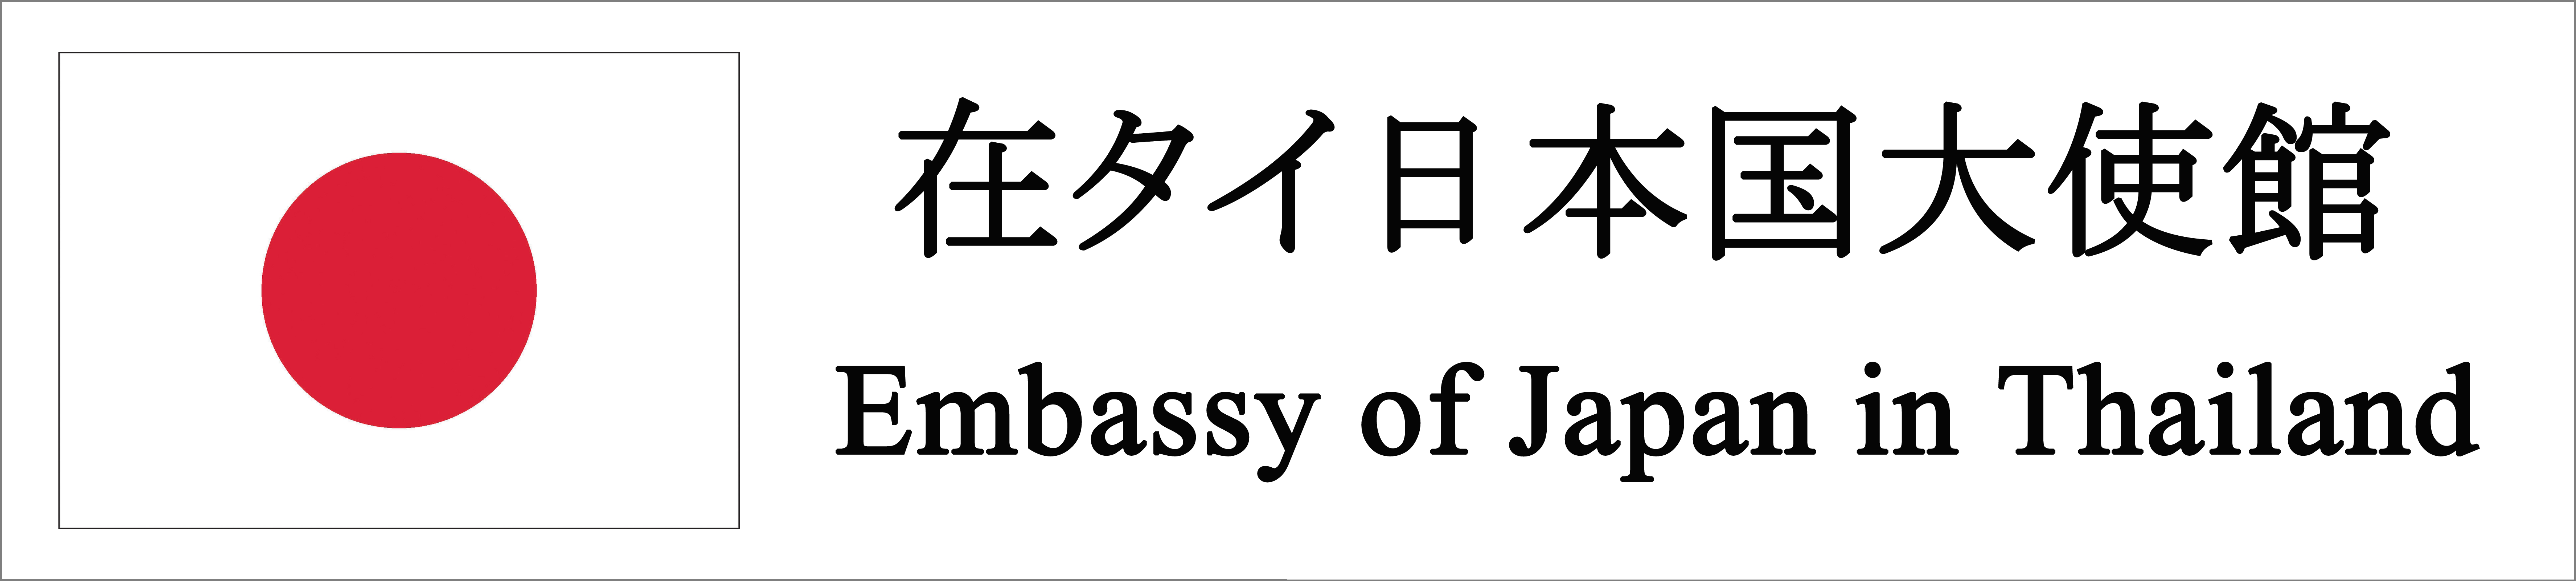 Embassy of Japan in Thailand